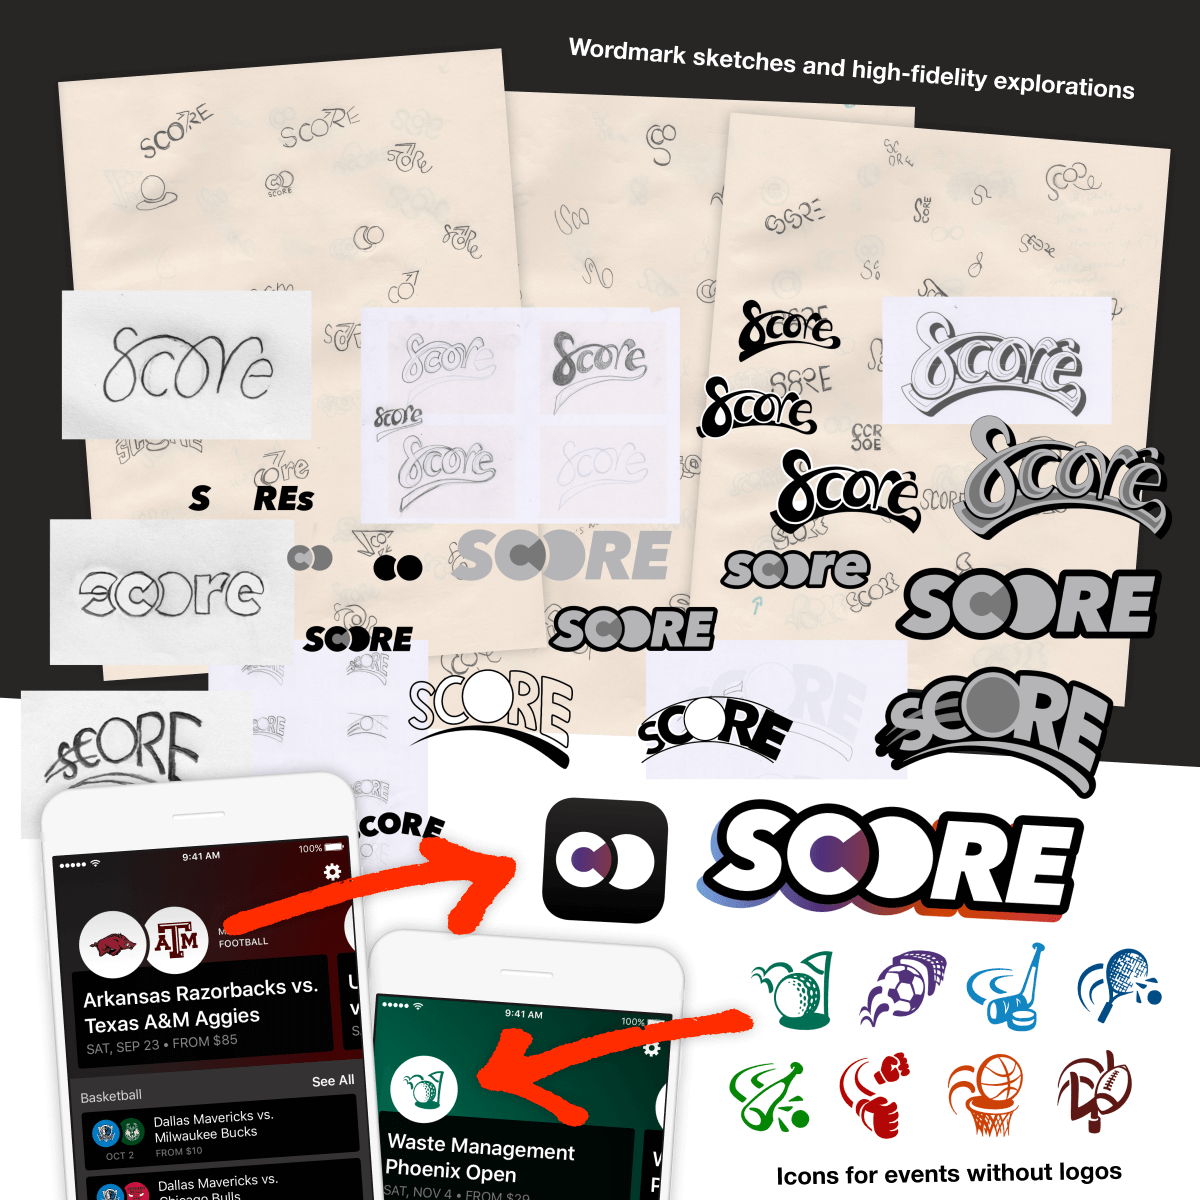 Collage of sketches used to develop ‘Score’ wordmark as well as final Score wordmark and icon, and icons designed for events without logos